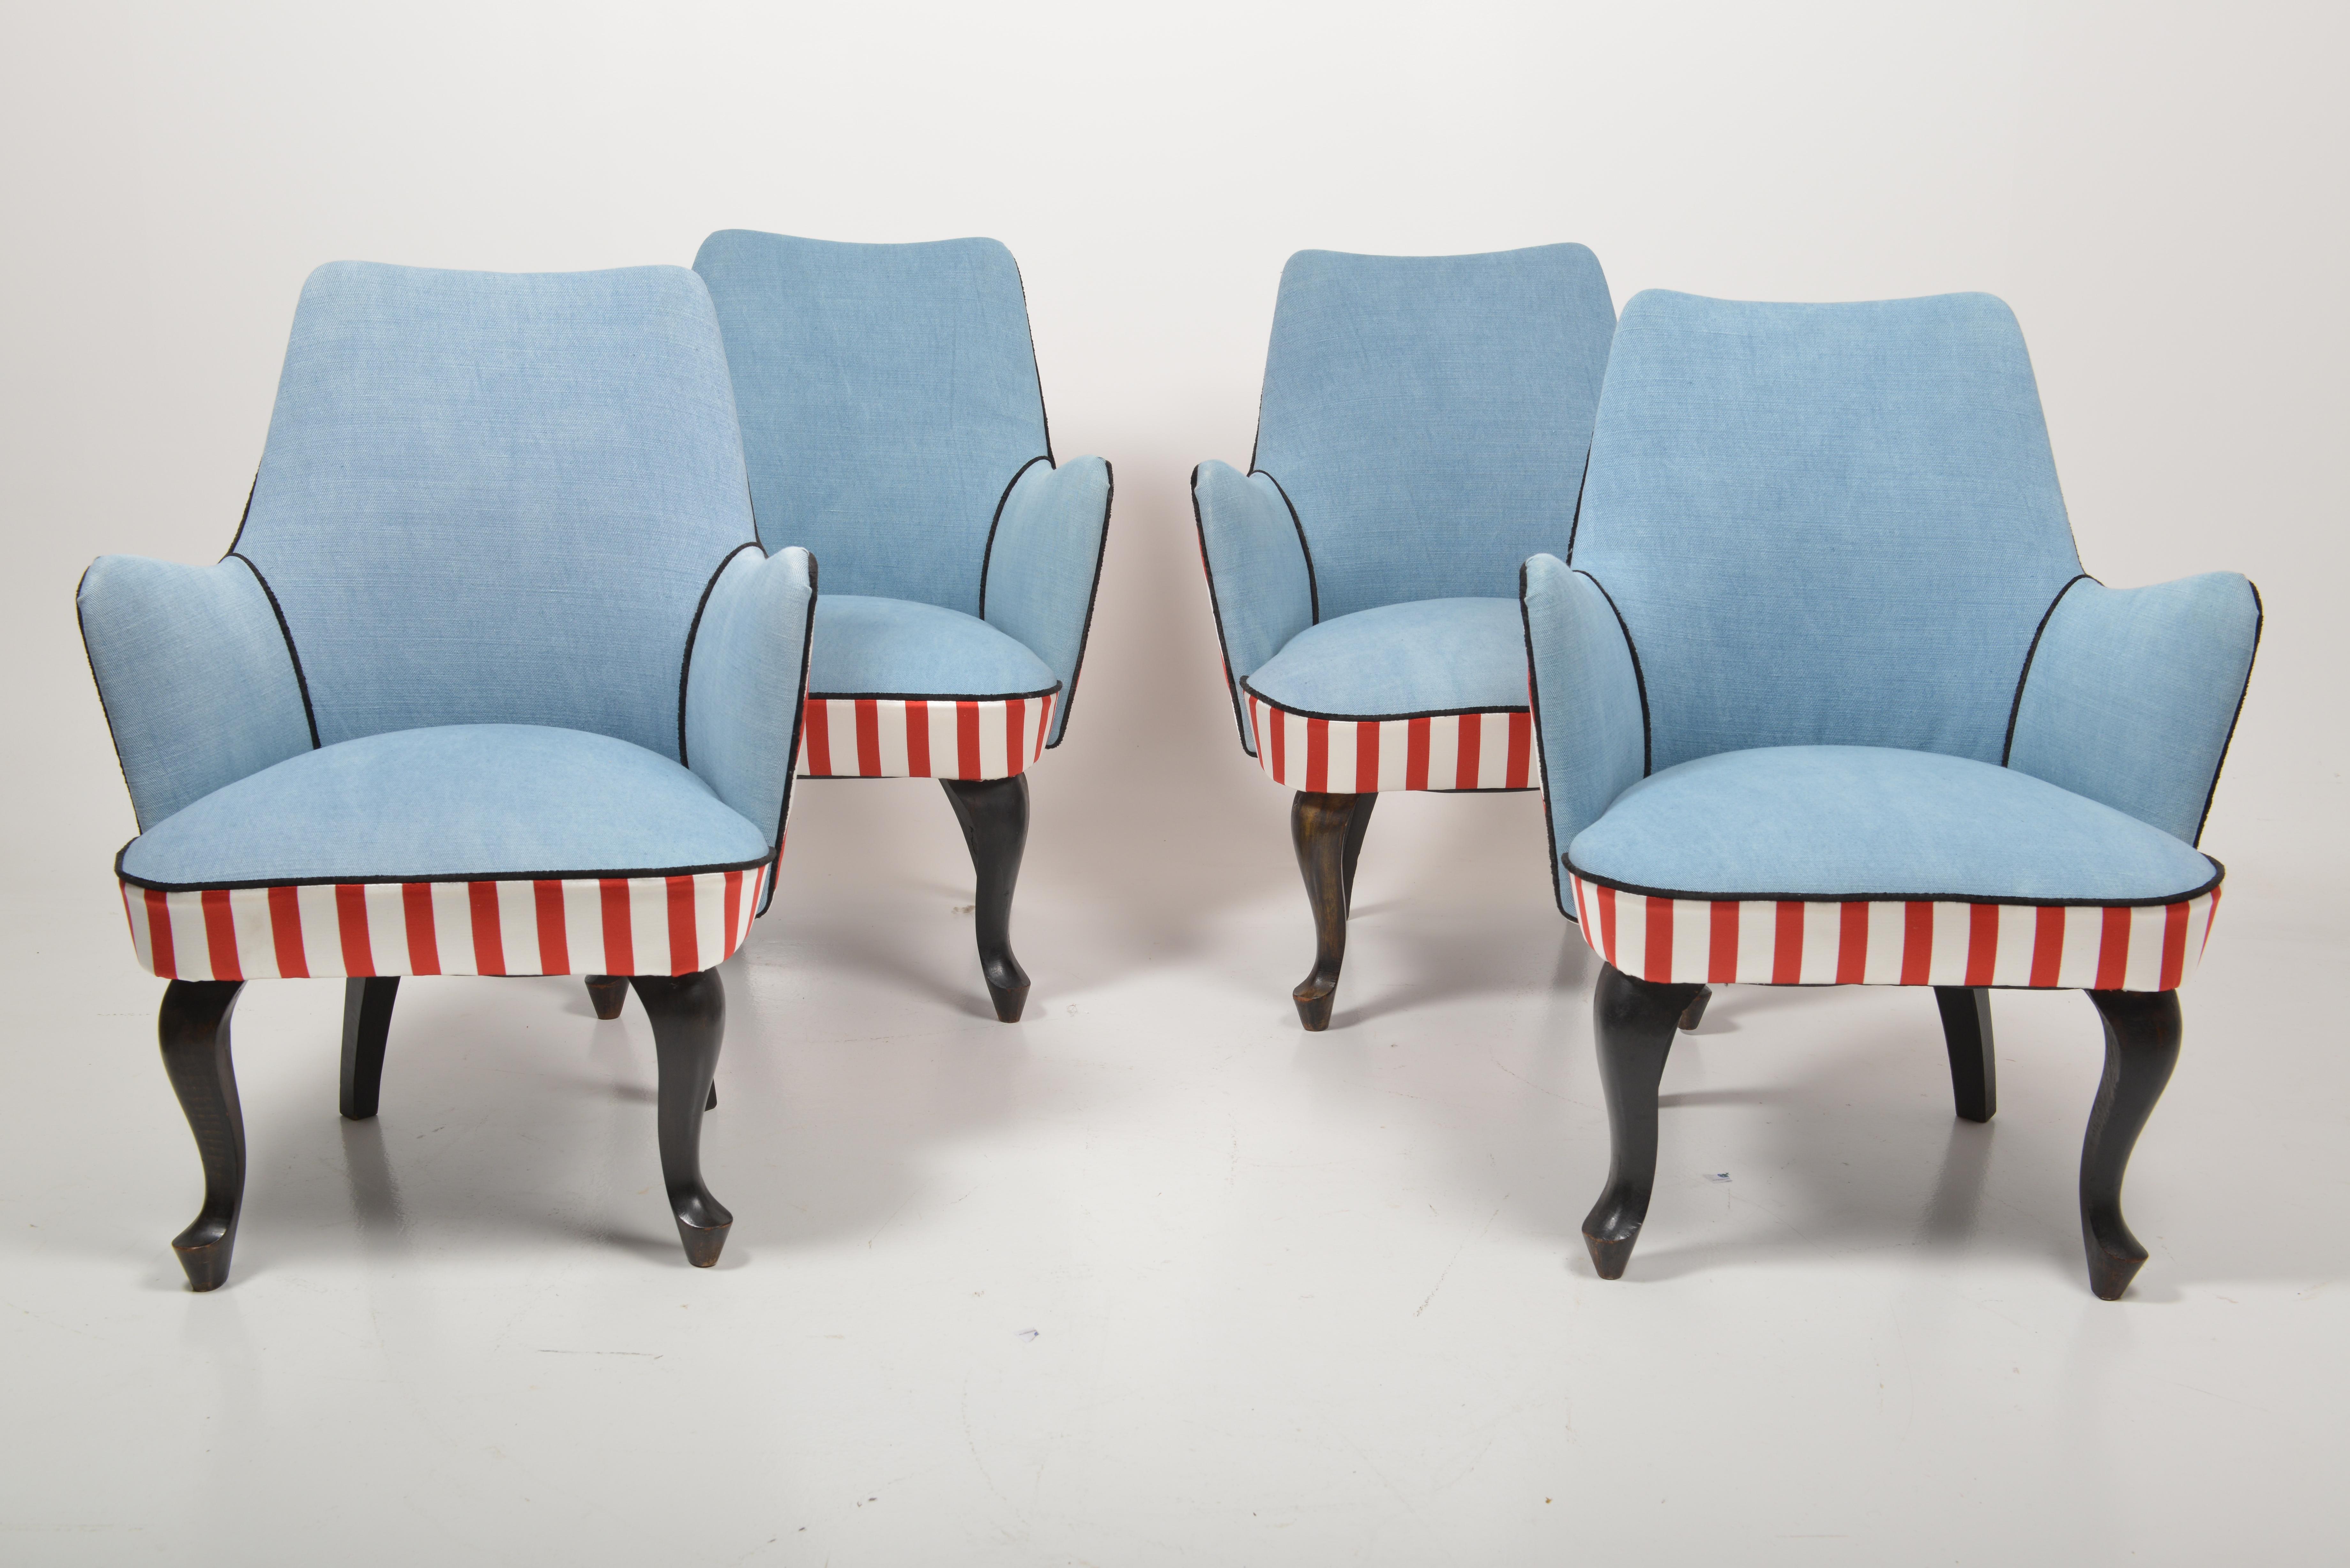 Extremely charming Italian set of four small side chairs in ebonised wood with cabriole legs and scroll foot. They are small sized and therefore ideal to maximize seating in a narrow space. We reupholstered them in a faded denim fabric and for the